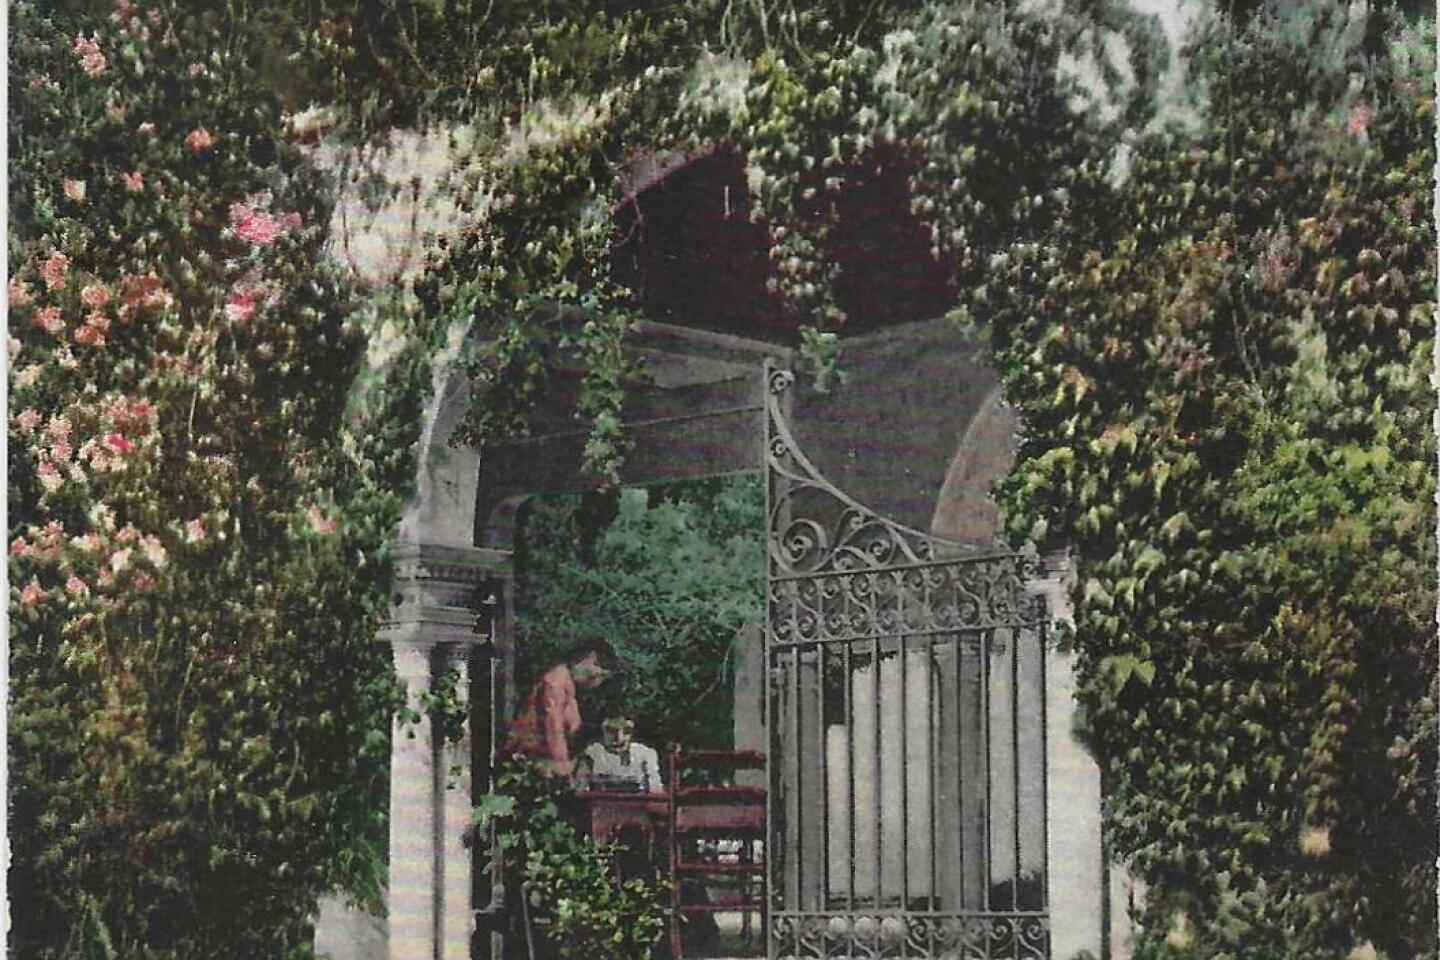 A postcard shows Casa de las Rosas, with steps leading to an arched entryway covered in flowering plants.